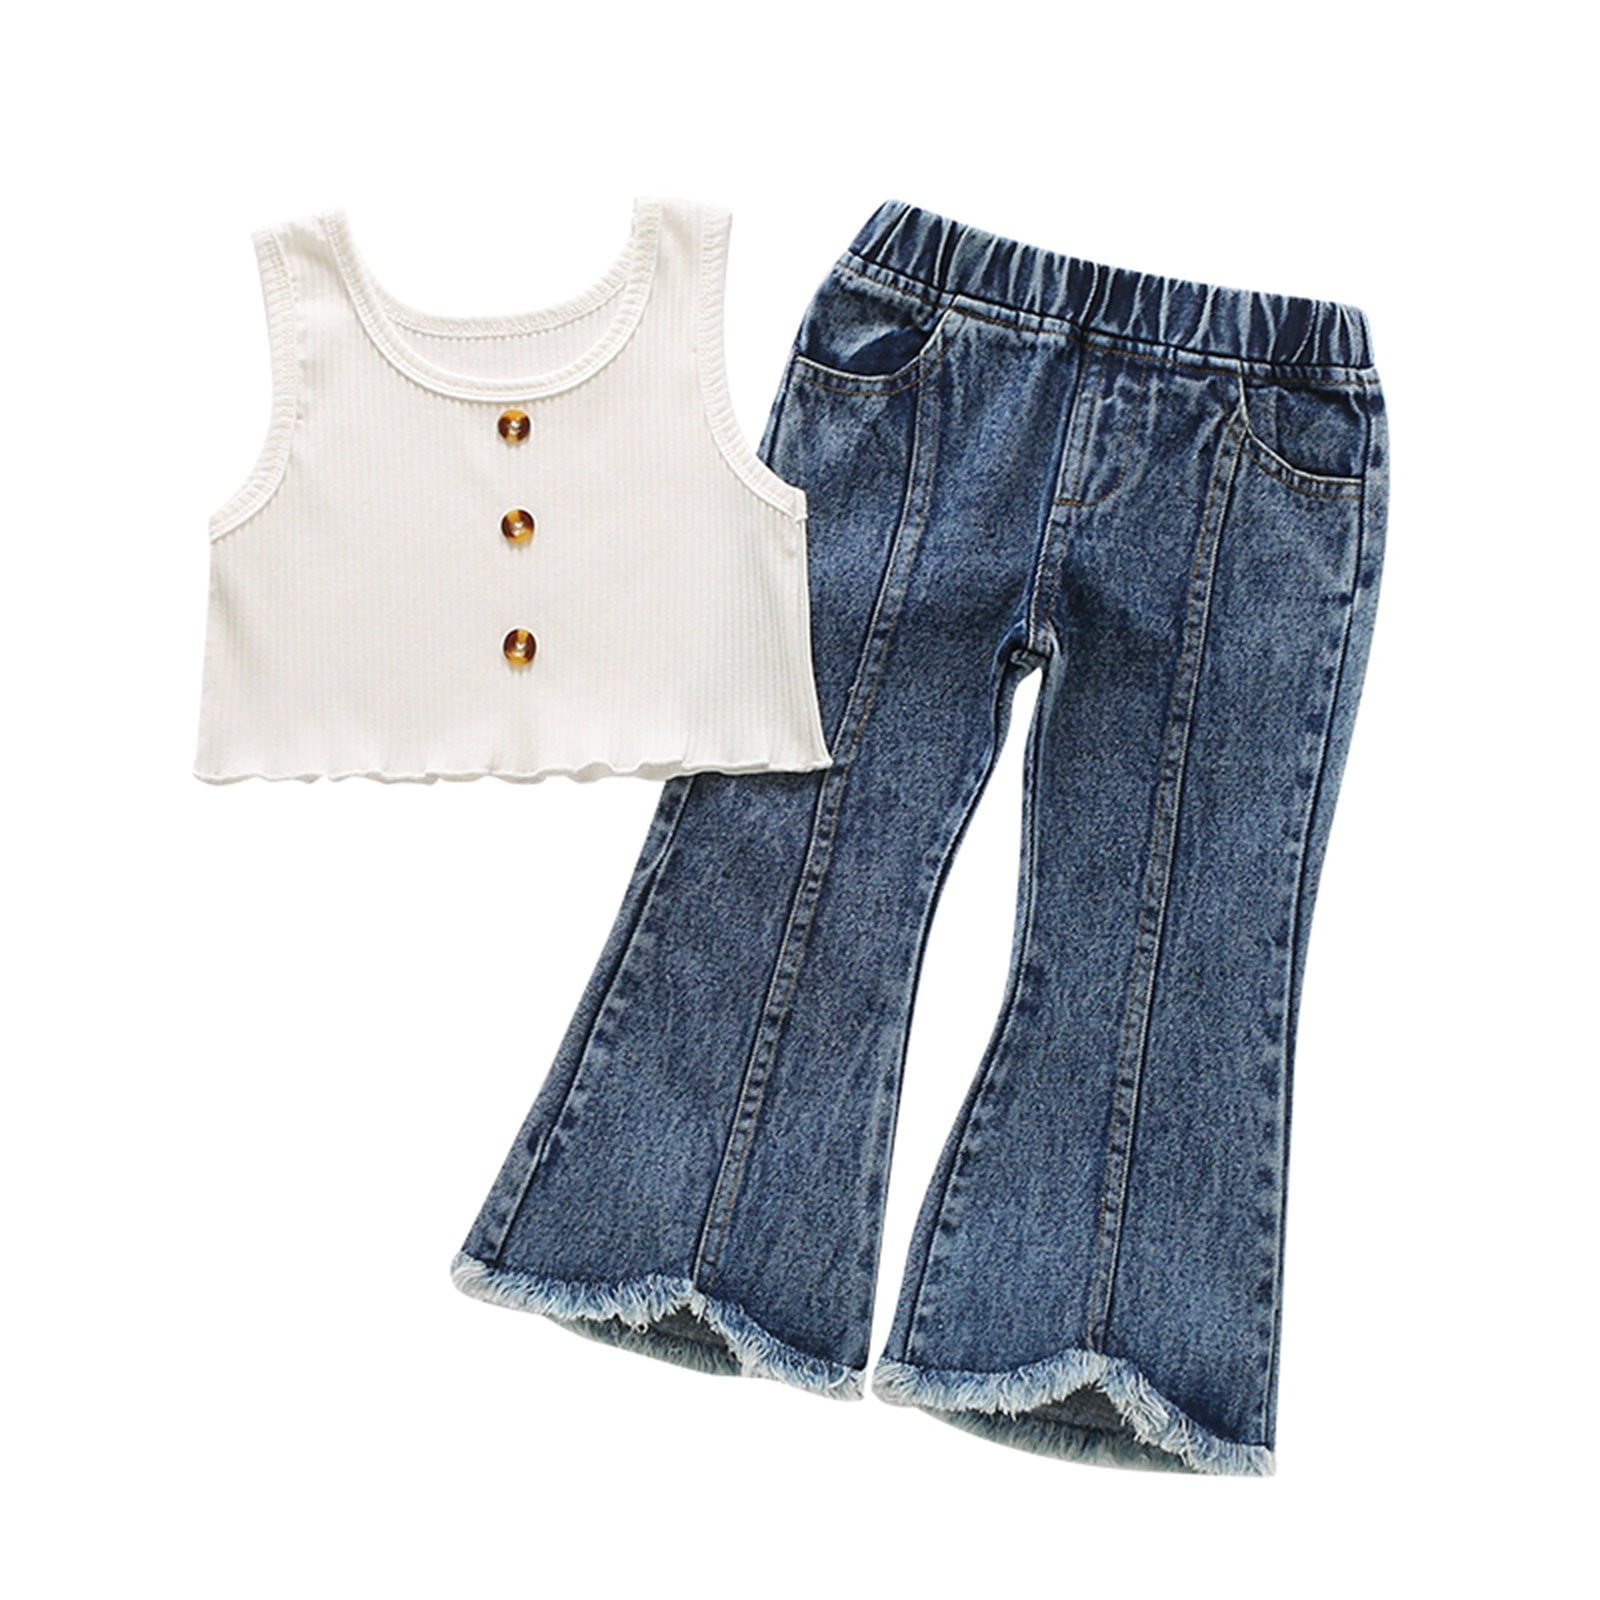 Girl Clothes Girl Clothes Denim Flared Jeans Outfits 2PCS Top And Denim  Pants Sets Cute Outfits Girls Size 16 